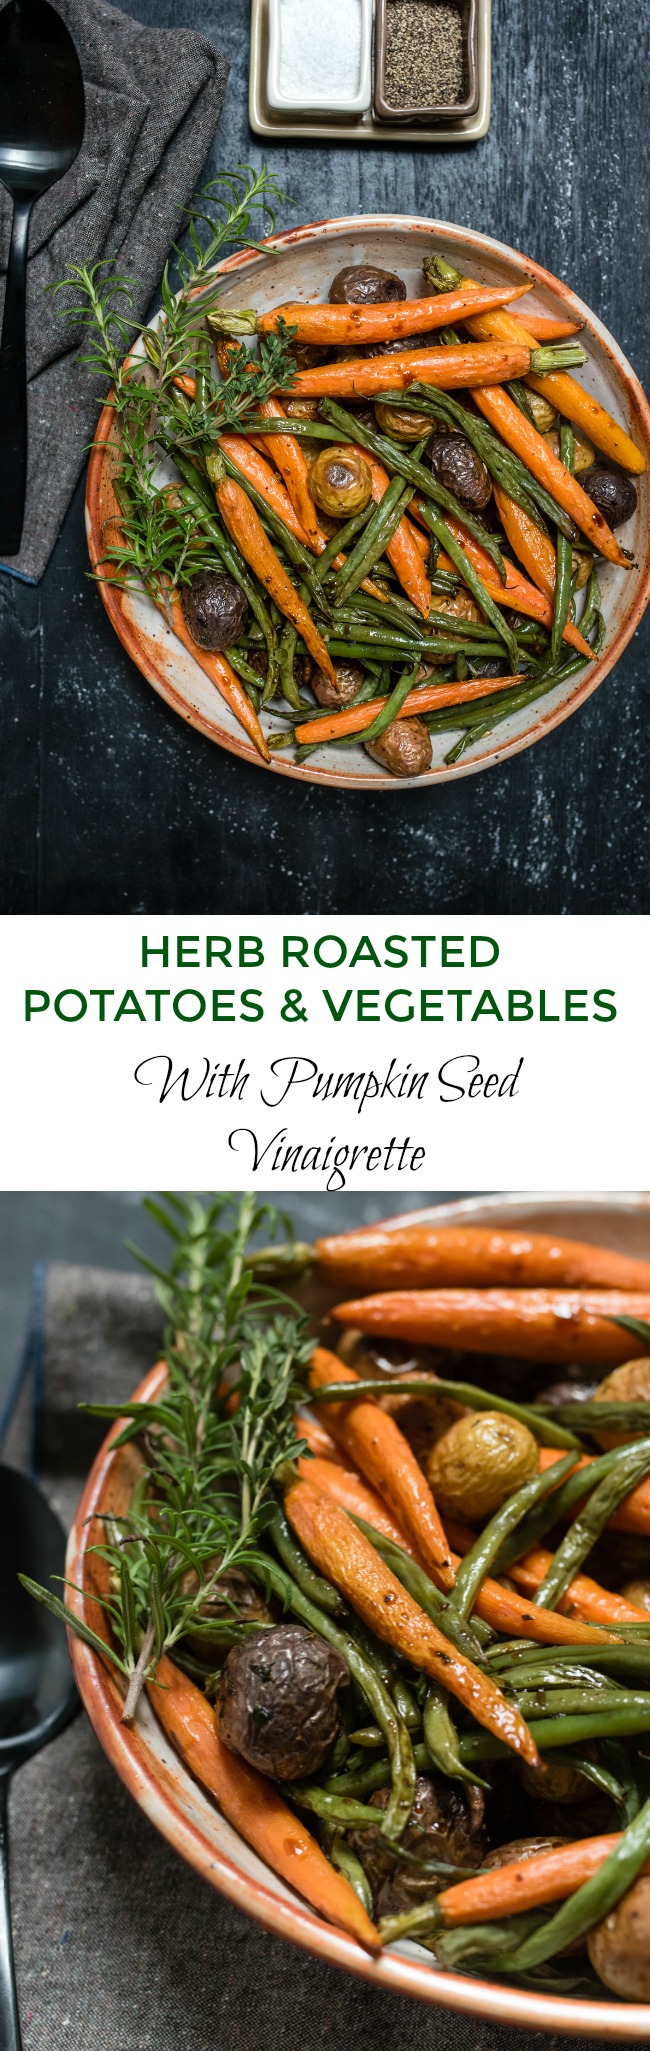 Herb Roasted Potatoes and Vegetables with Pumpkin Seed Vinaigrette, easy to make and naturally gluten free, great to serve along with roast beef, lamb, fish or to add to your vegetarian menu.